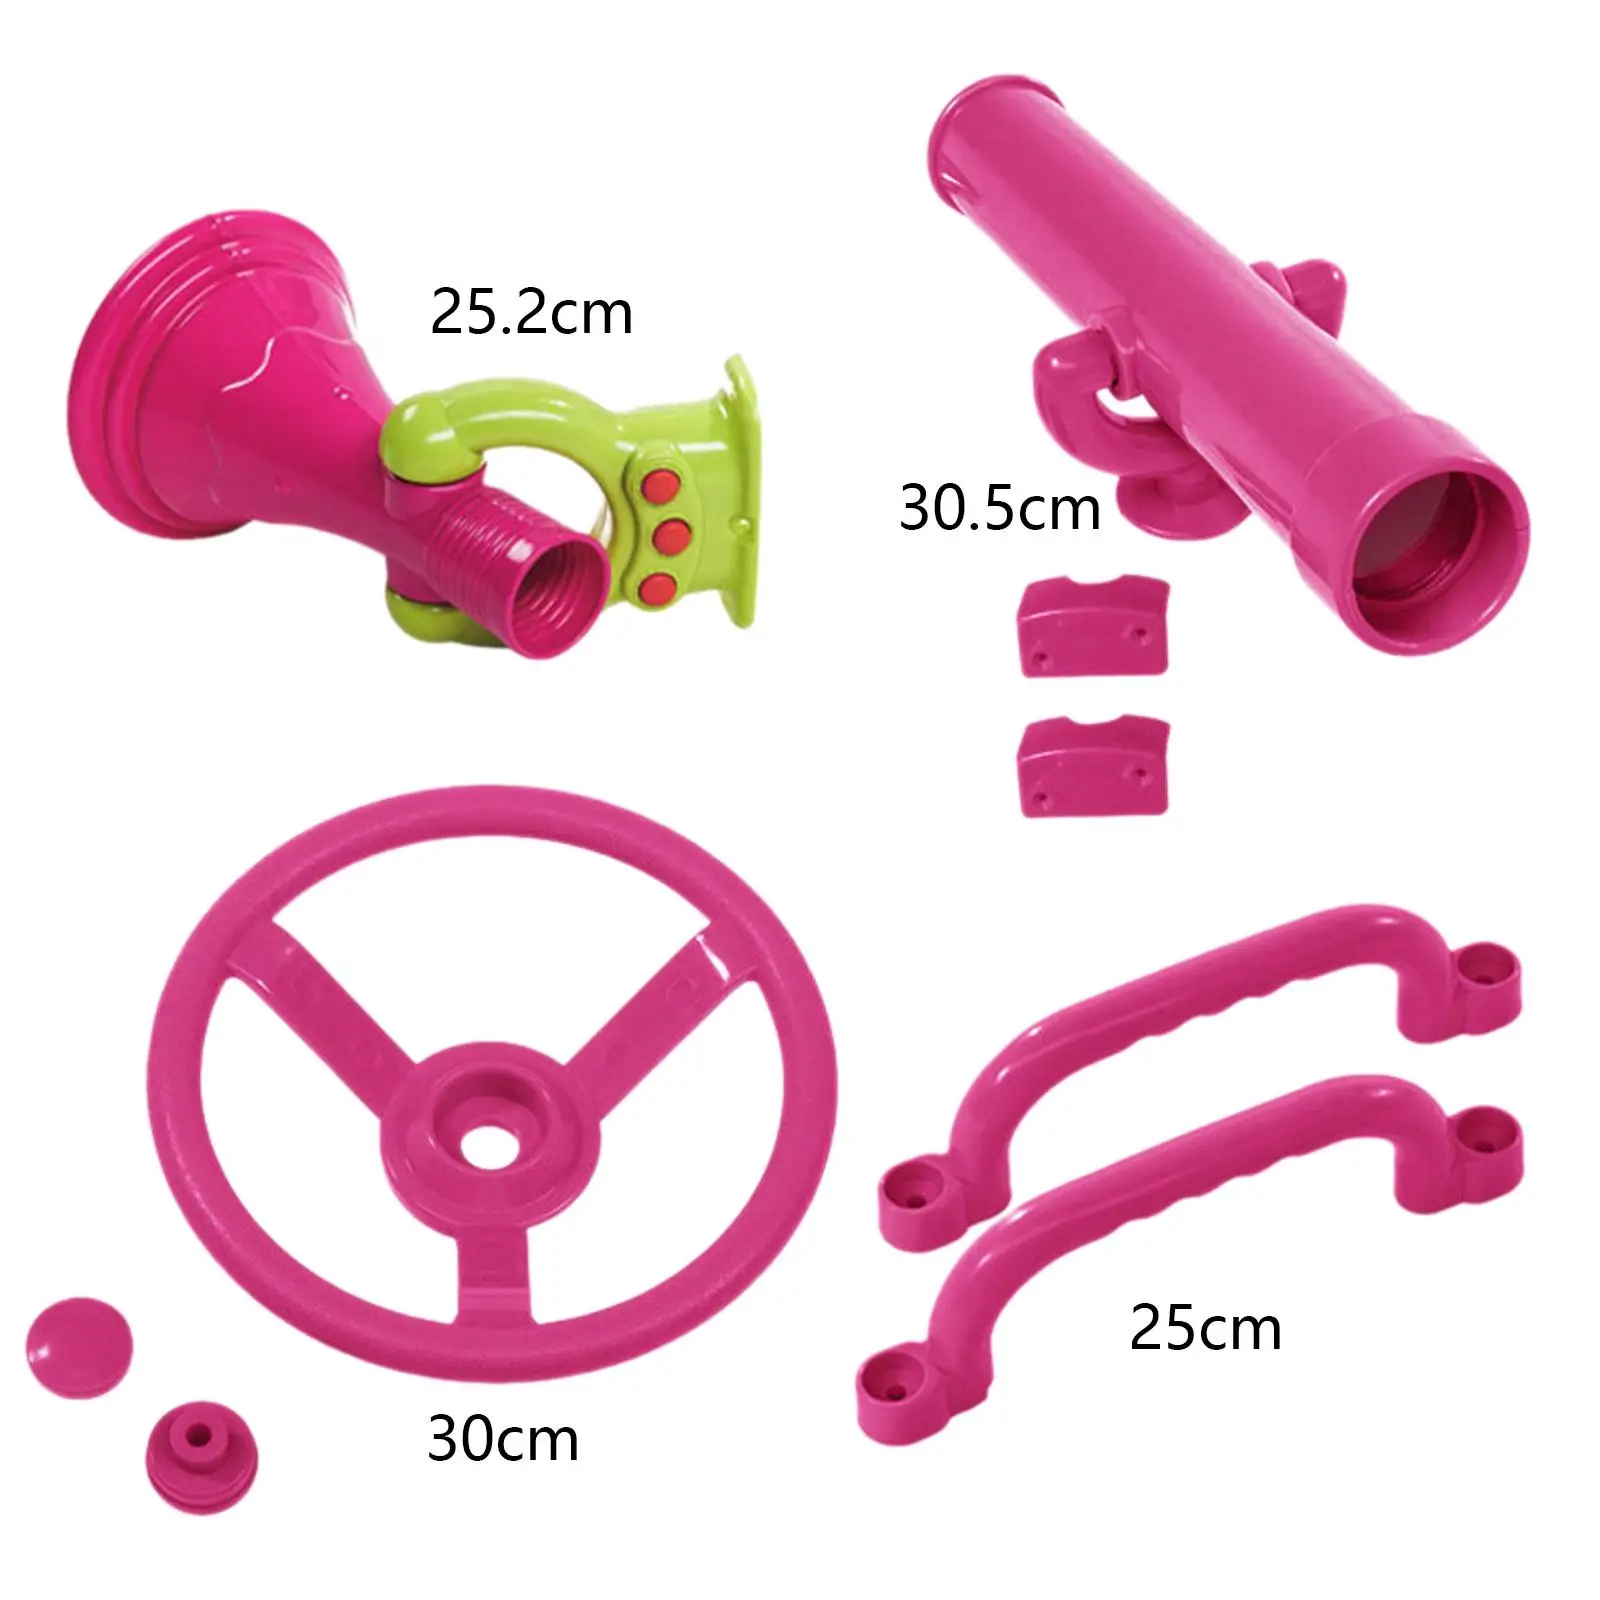 4x Playground Accessories Pink Playset Parts Pirate Ship Wheel for Kids for Outdoor Playhouse Backyard Treehouse Boys Girls Kids